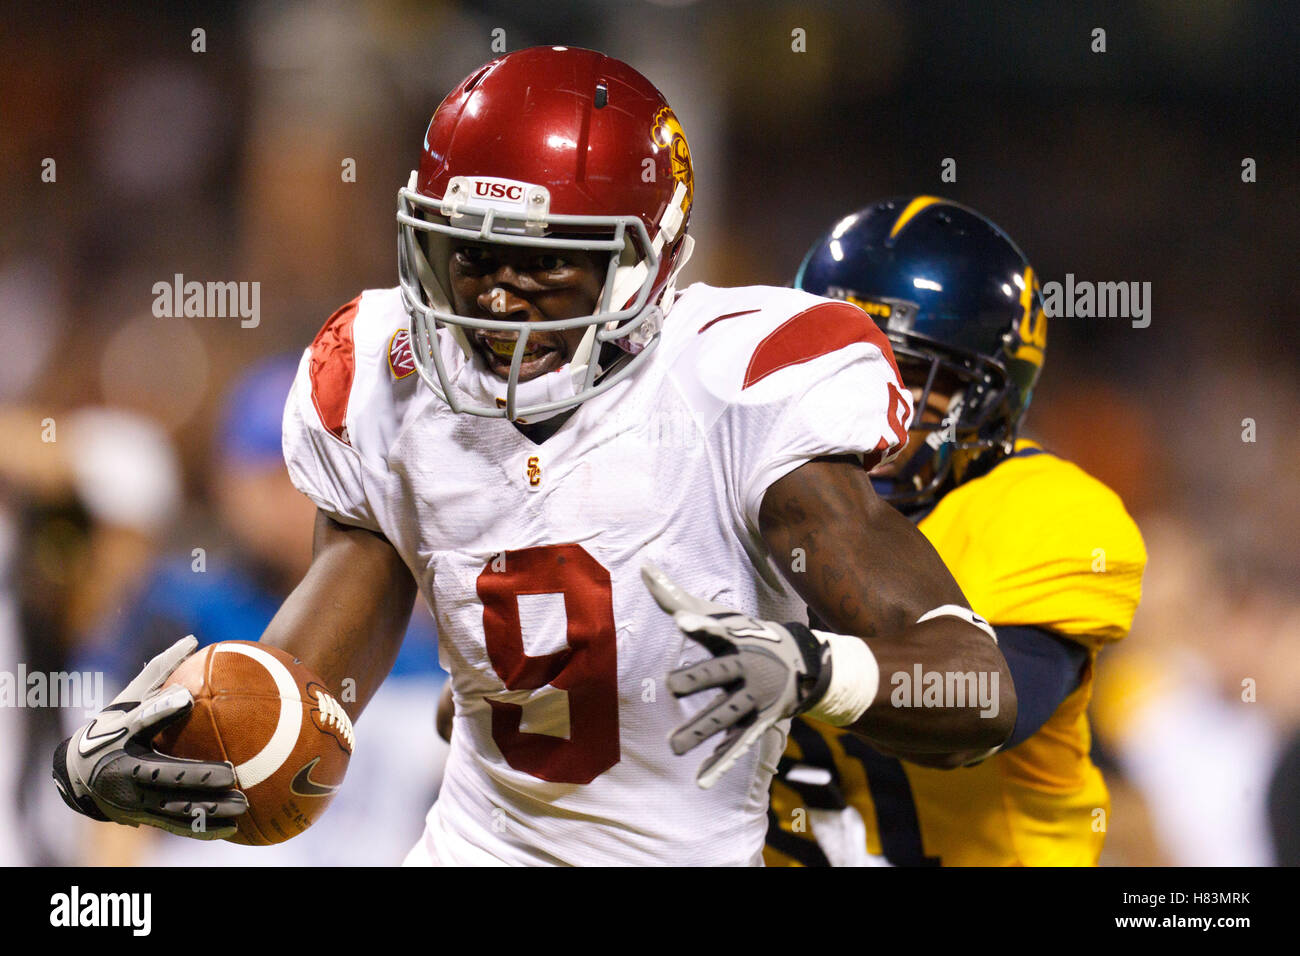 Oct 13, 2011; San Francisco CA, USA;  Southern California Trojans wide receiver Marqise Lee (9) catches a pass for a touchdown in front of California Golden Bears defensive back Stefan McClure (back) during the second quarter at AT&T Park.  Southern Calif Stock Photo